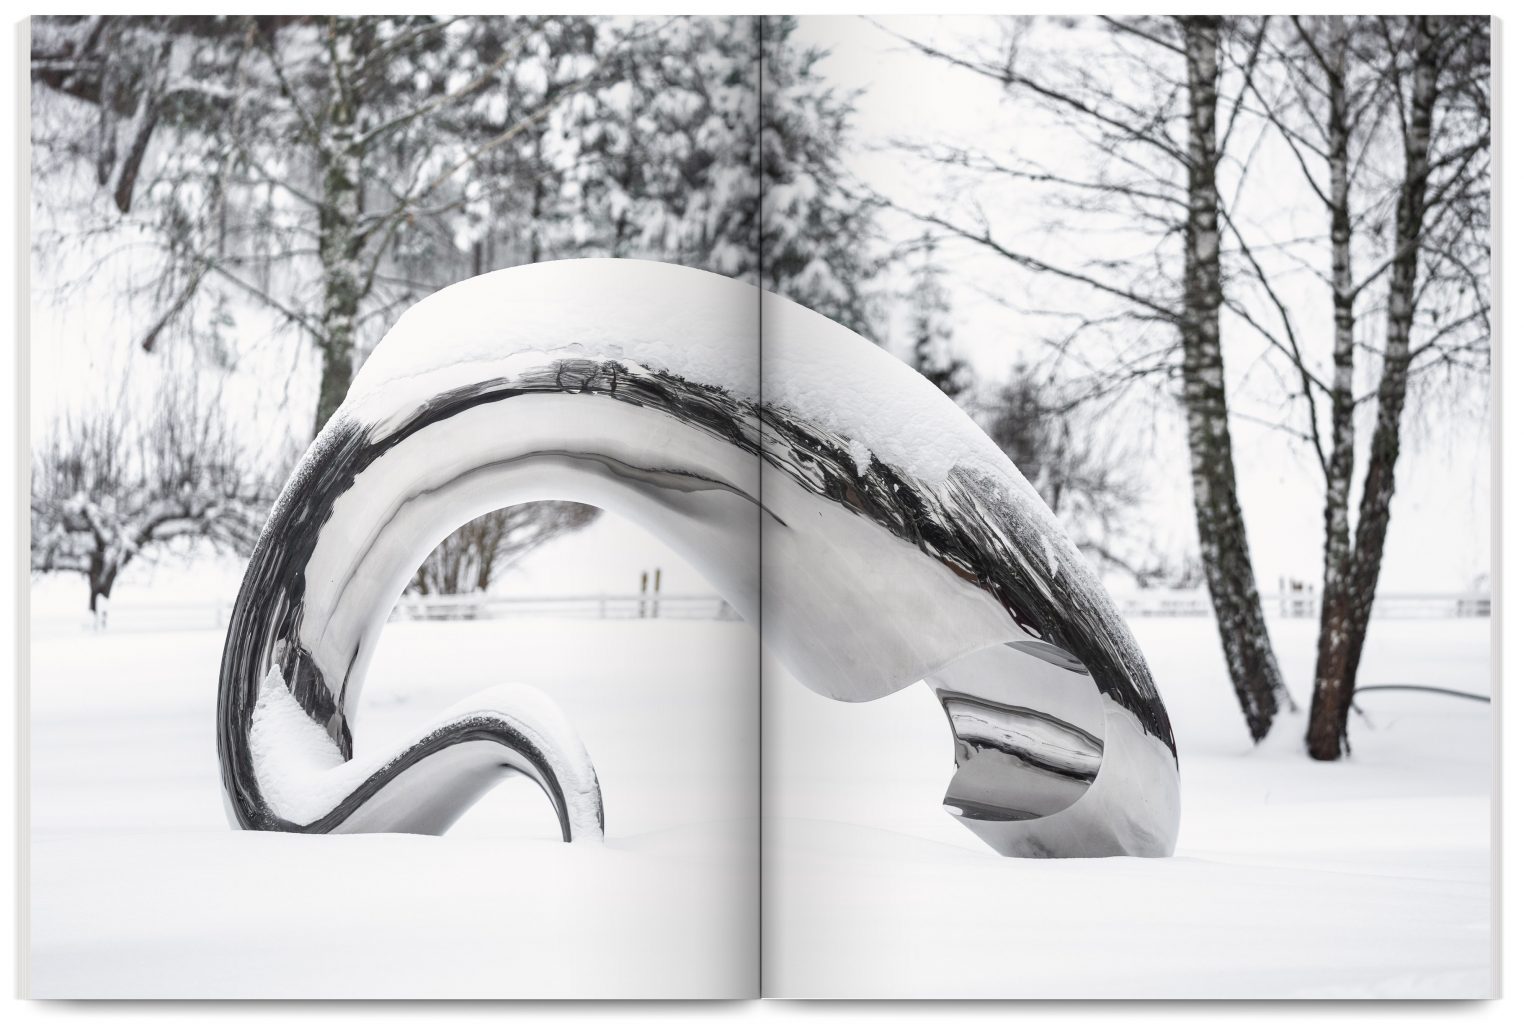 Exhibition catalogue, Tony Cragg – Material in Mind, Kistefos, Norway, 2023, designed by In the shade of a tree studio, founded by Sophie Demay and Maël Fournier Comte, joined by Jimmy Cintero.